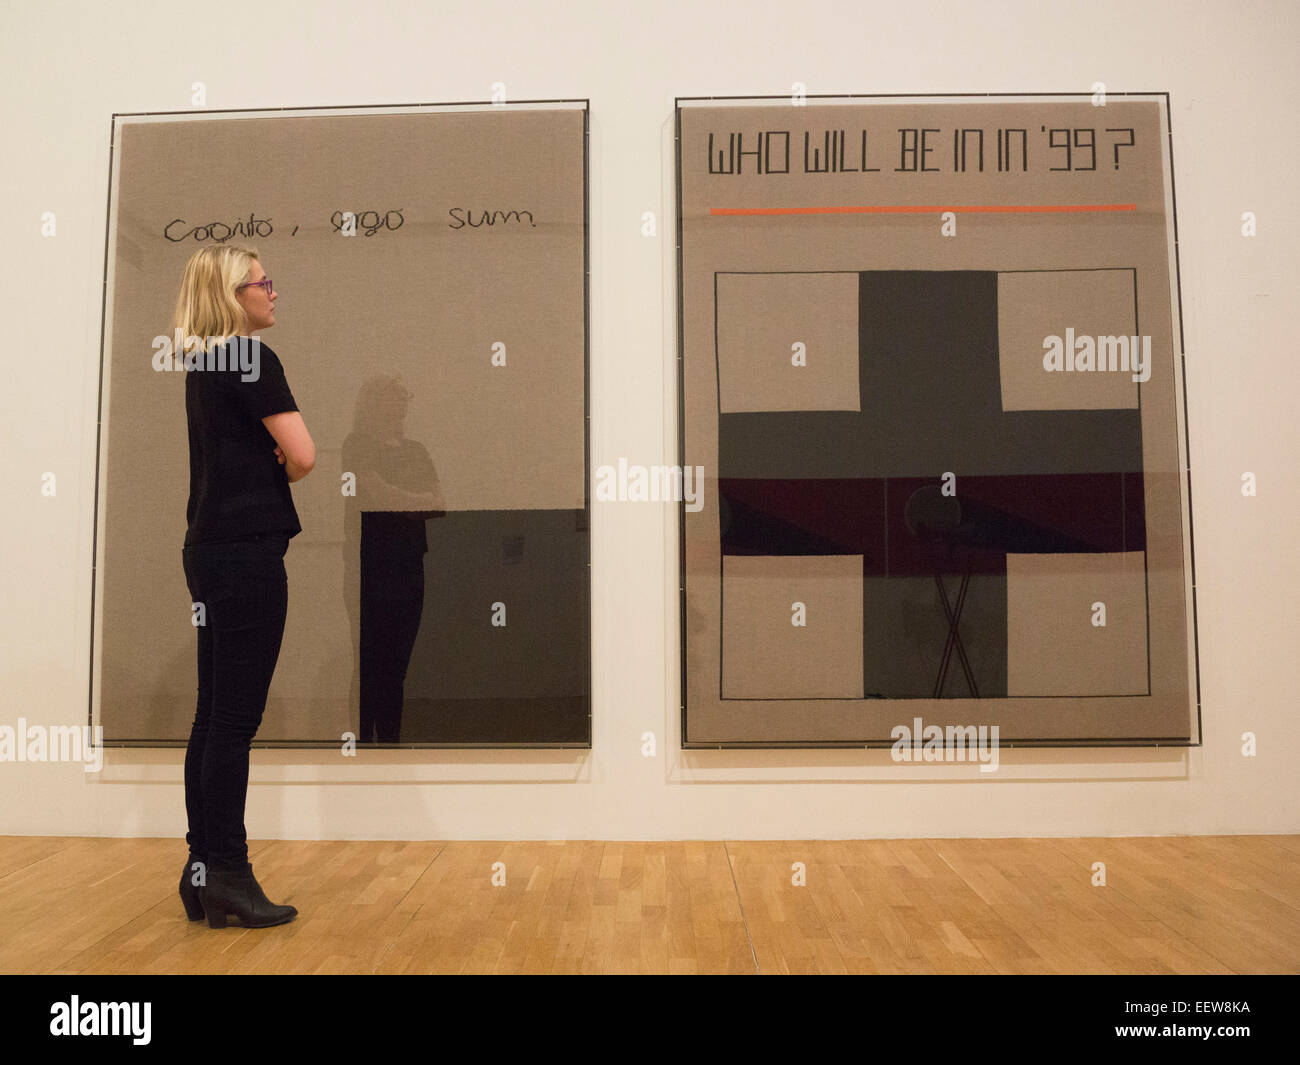 A Whitechapel employee looks at the Rosemarie Trockel artworks 'Cogito, ergo sum', 1999, and 'Who will be in in '99', 1988. The Whitechapel Gallery presents the exhibition Adventures of the Black Square, tracing a century of Abstract art from 1915 to today. Stock Photo